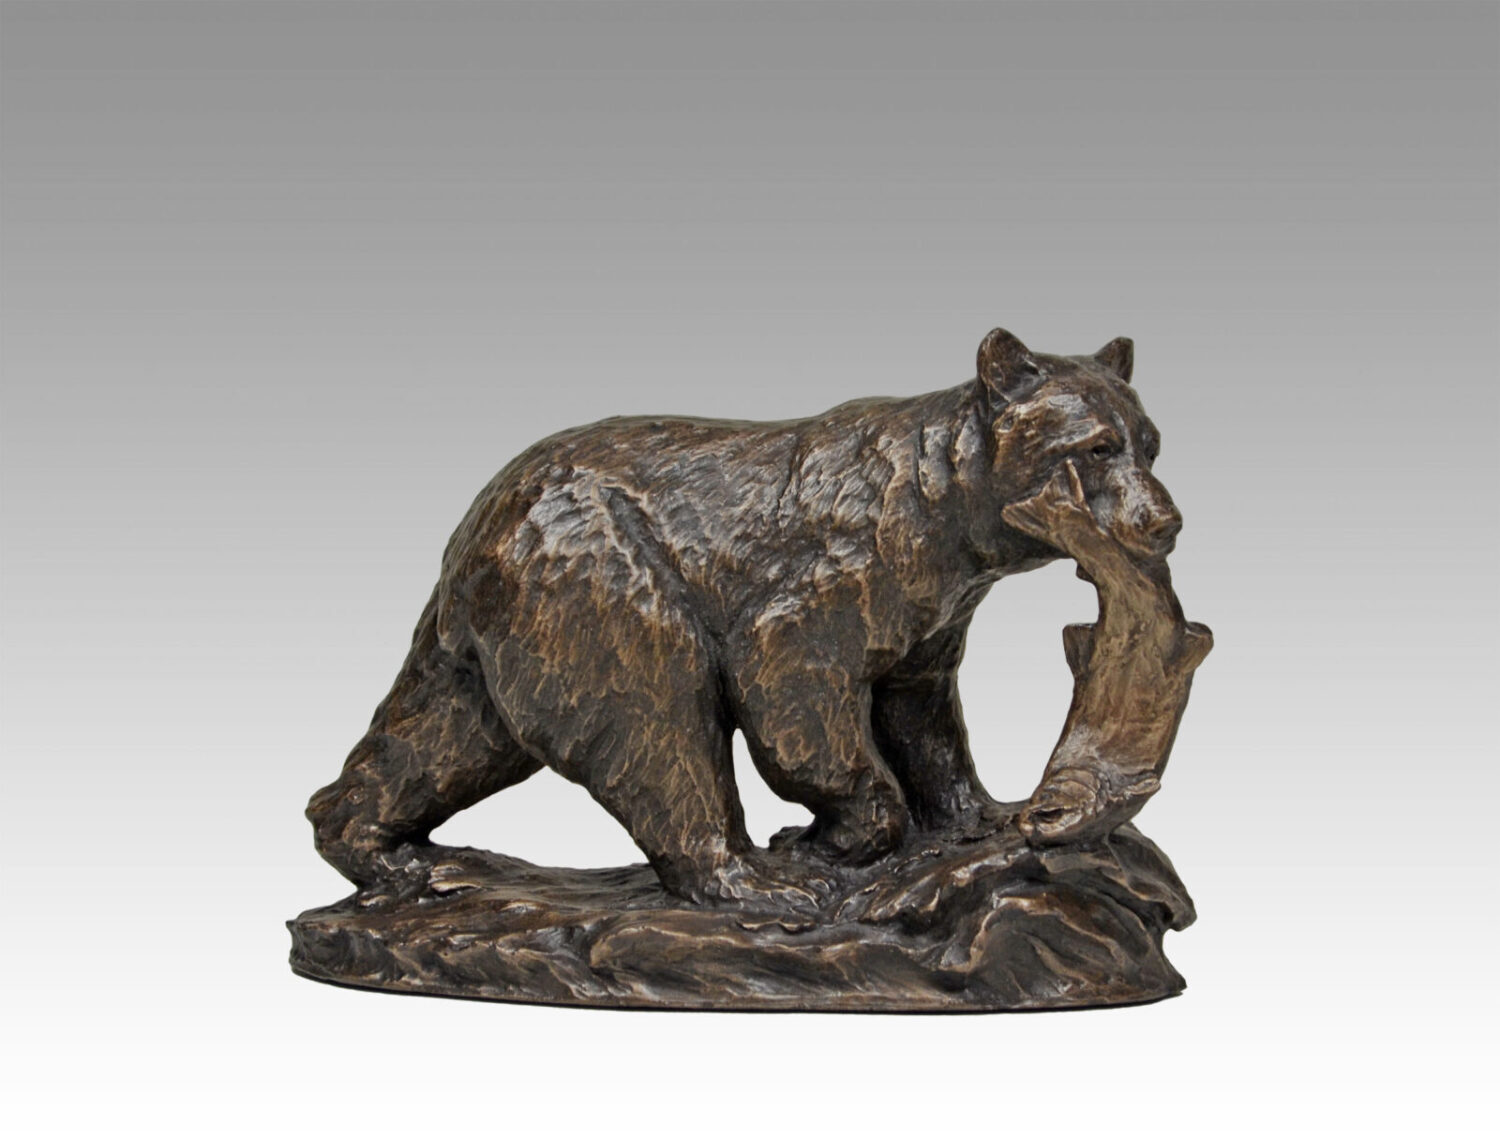 Gallery, Shore Lunch, $275 CAD, Metal Infused, 10” L, Edition 60, Wildlife Sculpture of a bear and salmon, Sculptor Tyler Fauvelle